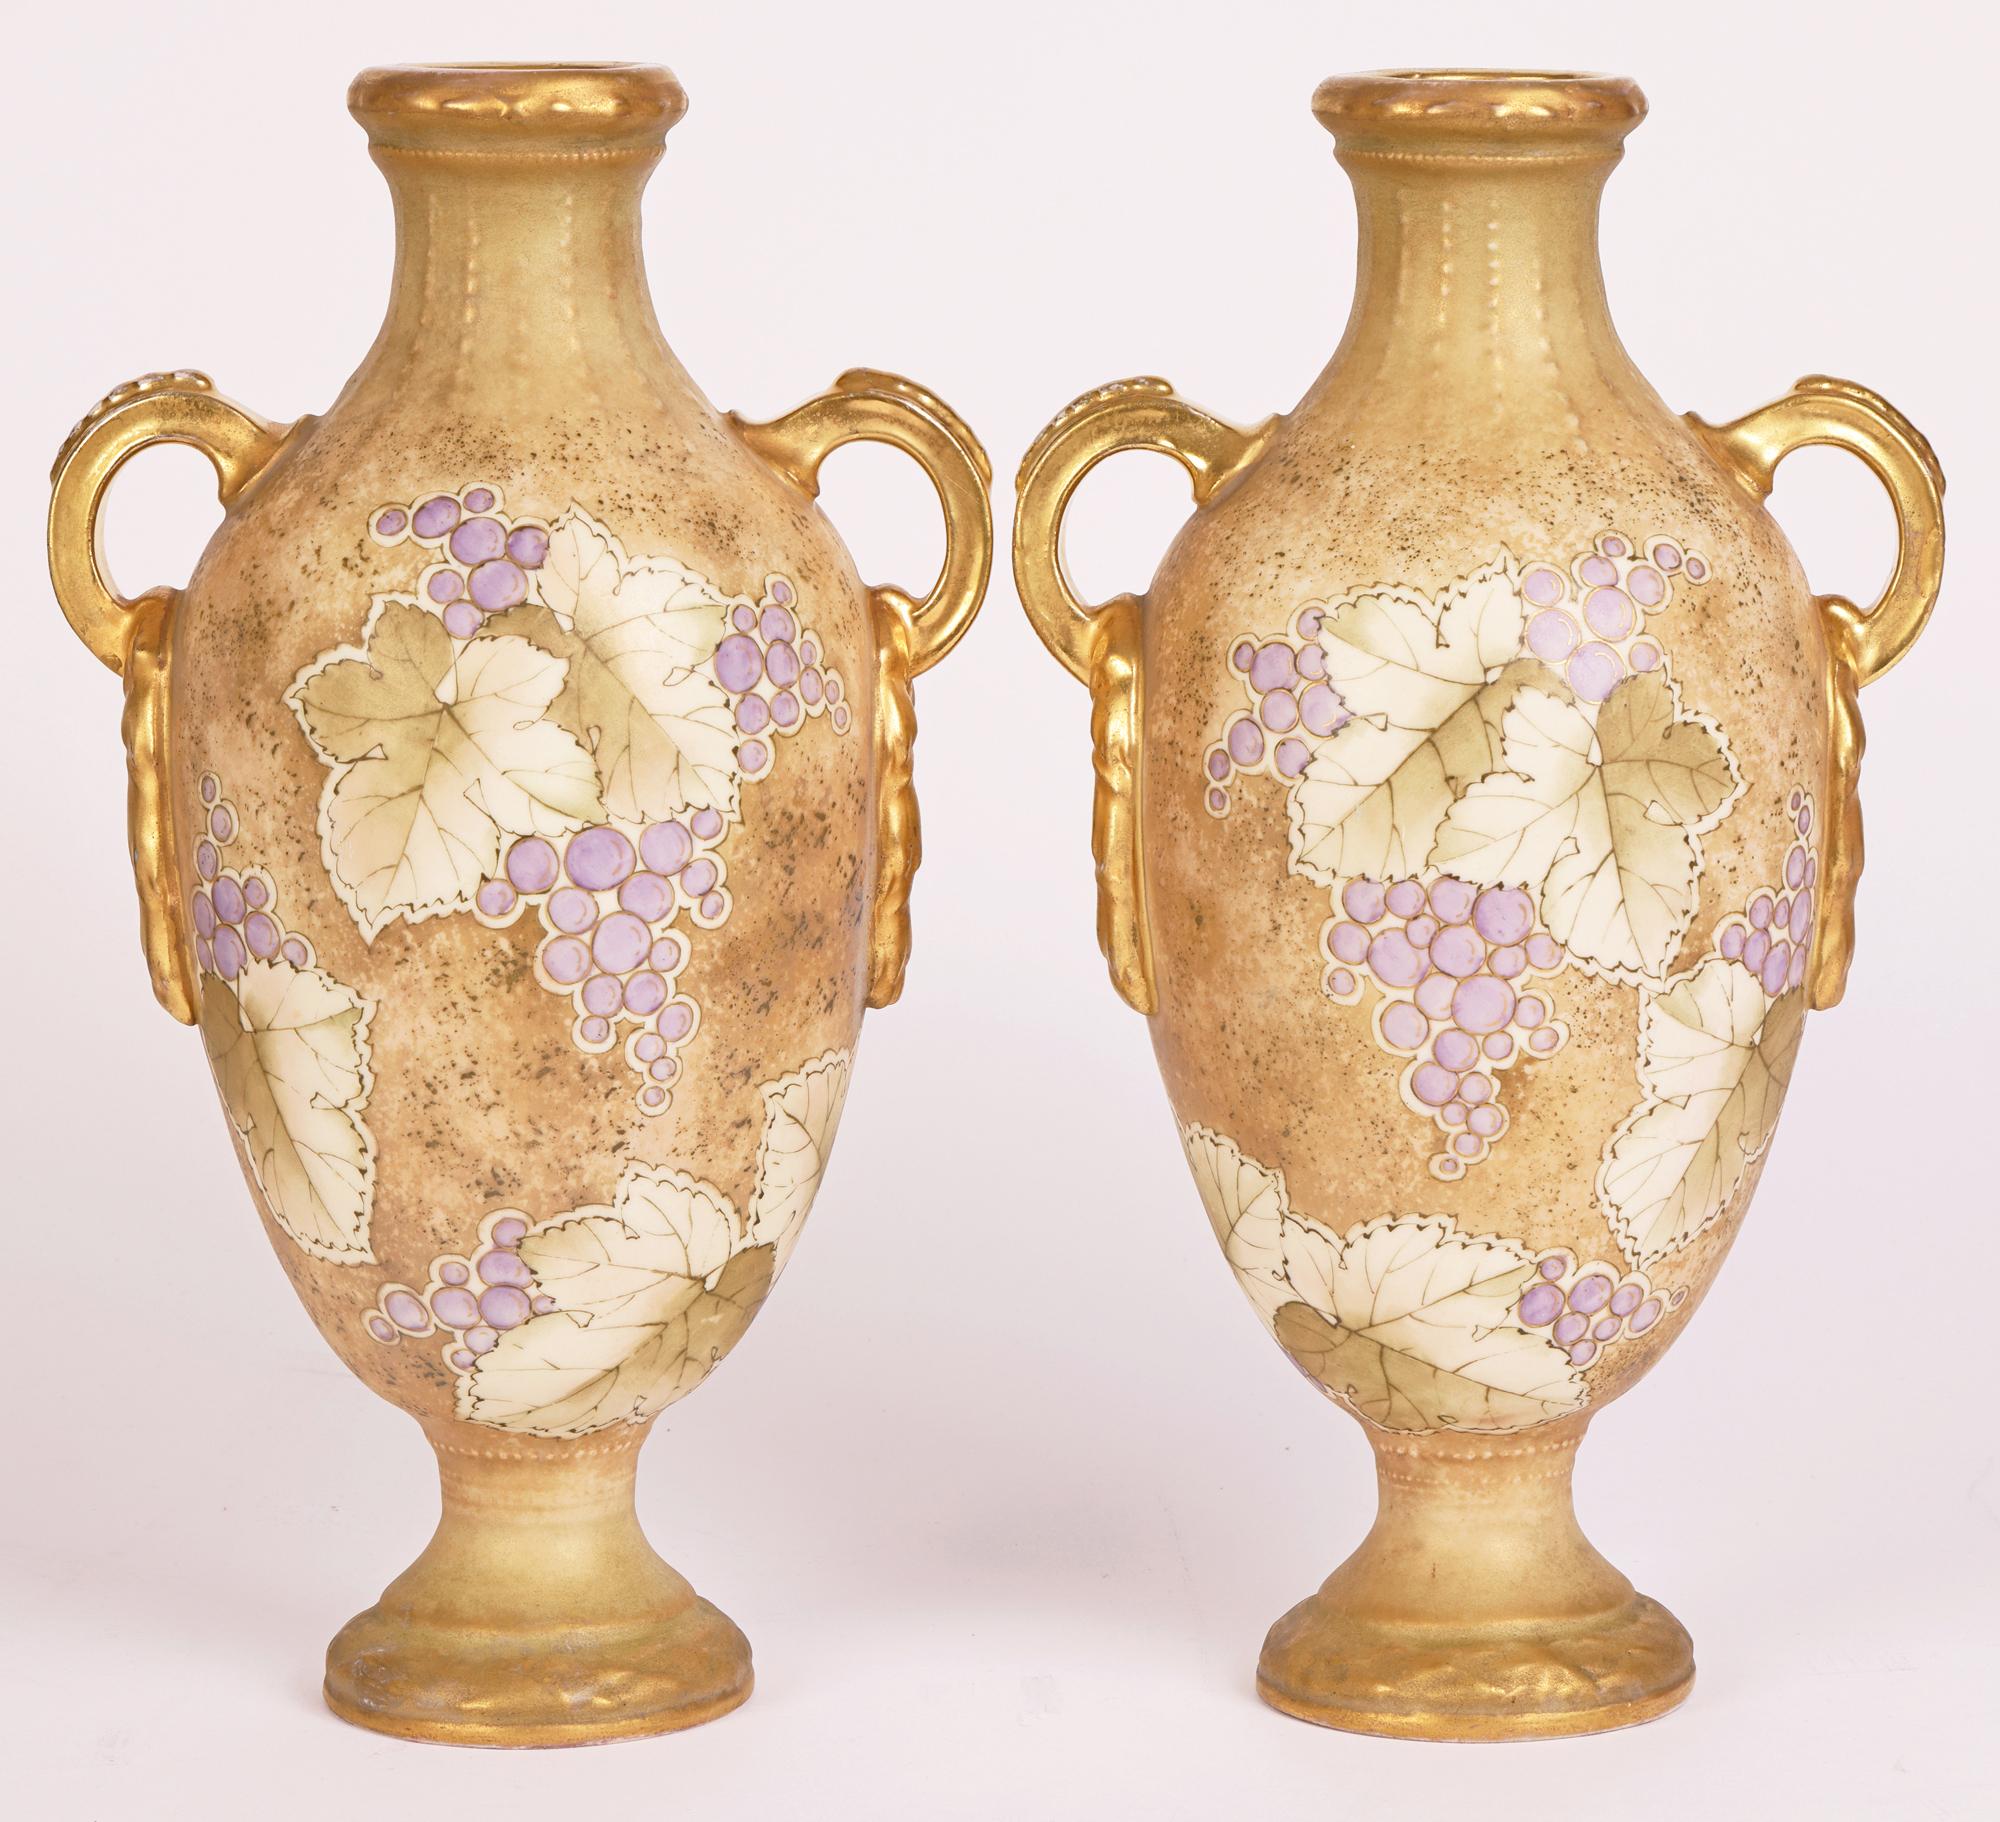 Turn Teplitz RSK Amphora Pair Art Nouveau Hand-Painted Twin Handled Vases For Sale 11